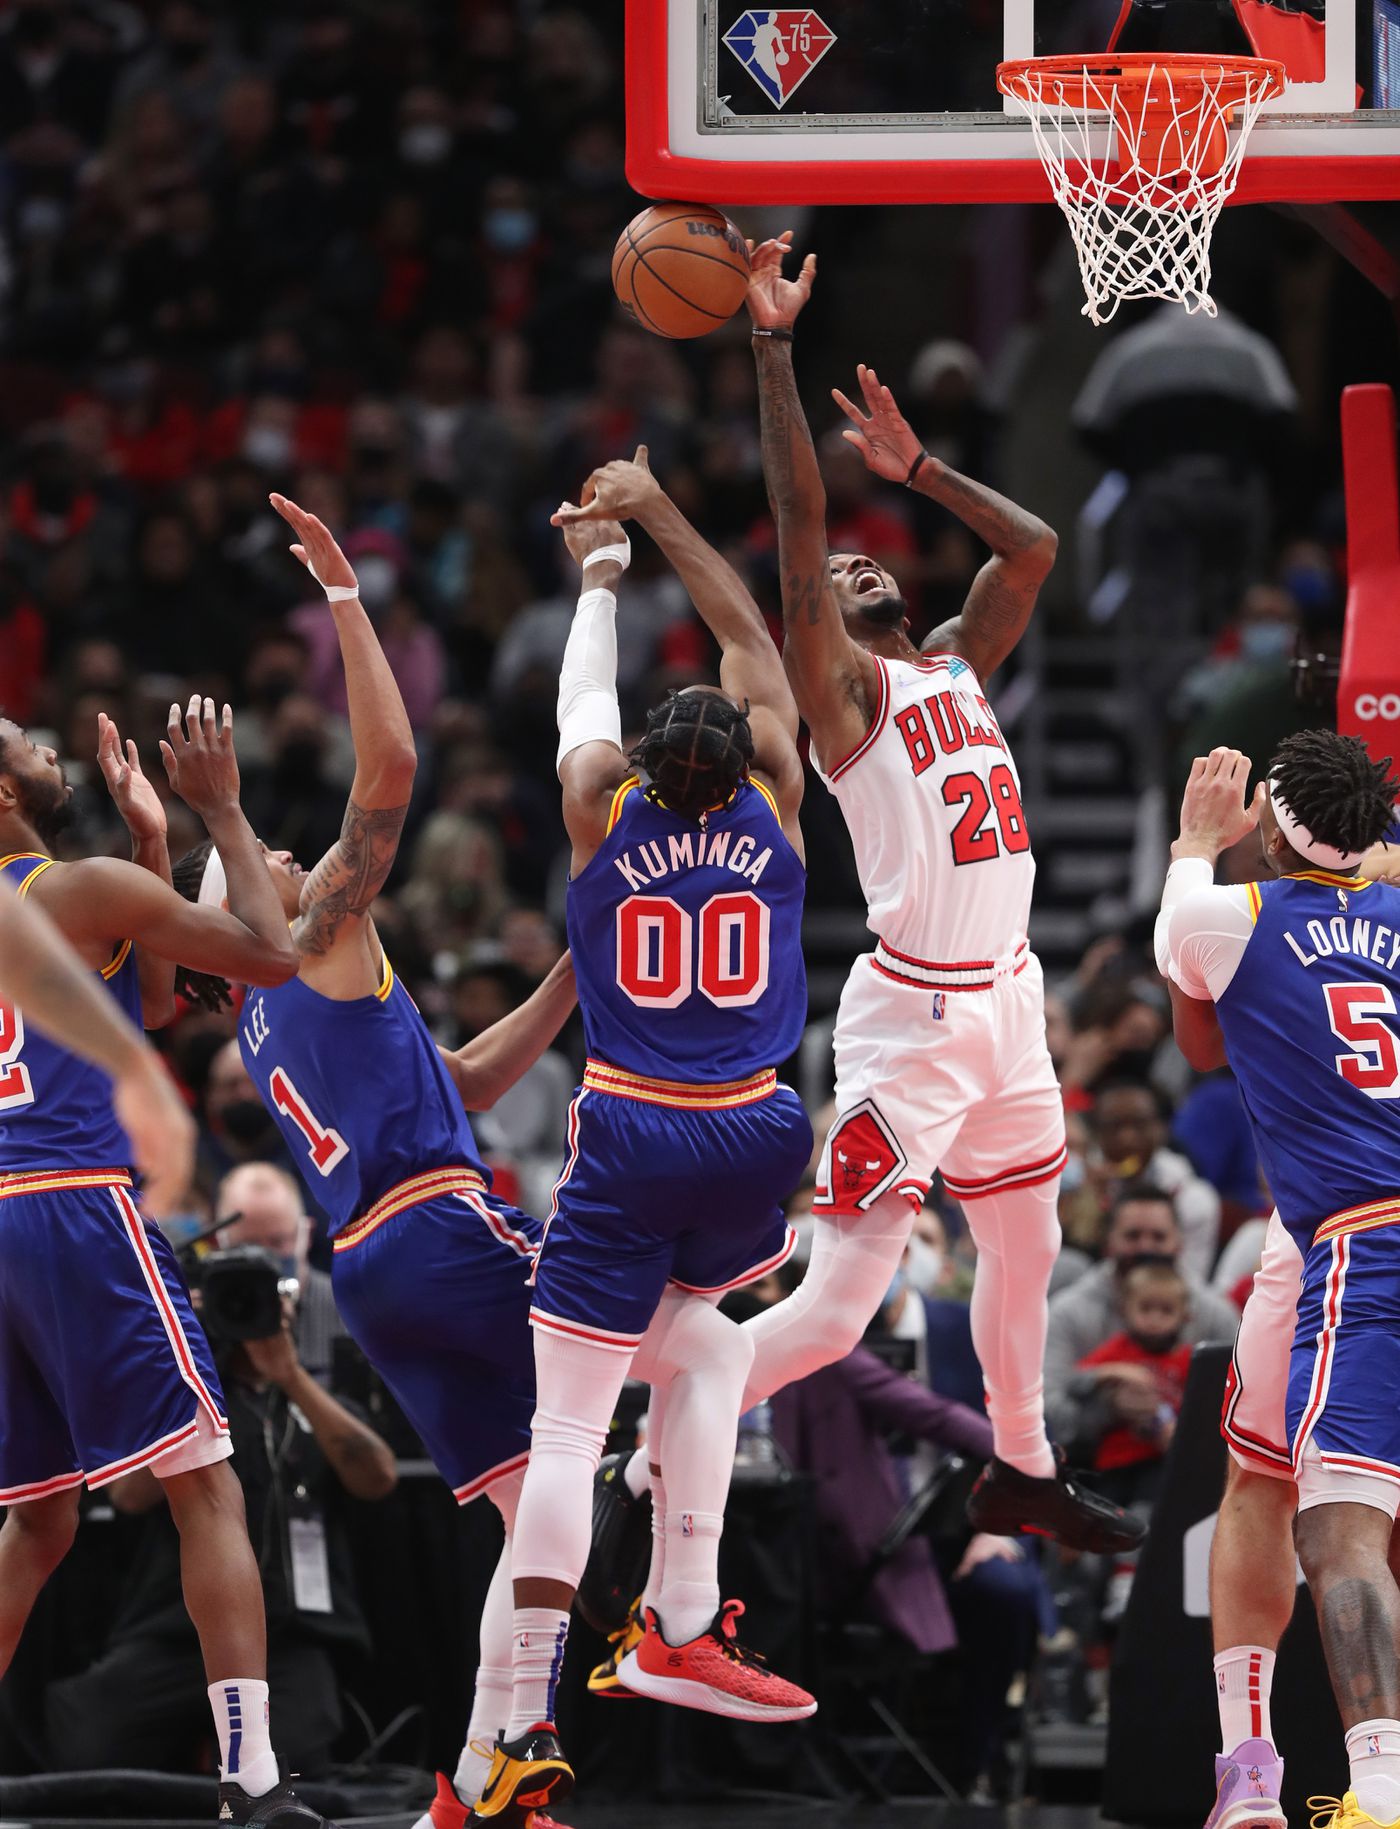 Golden State Warriors forward Jonathan Kuminga (00) blocks a shot attempt by Chicago Bulls forward Alfonzo McKinnie (28) in the third quarter at United Center on Jan. 14, 2022, in Chicago.